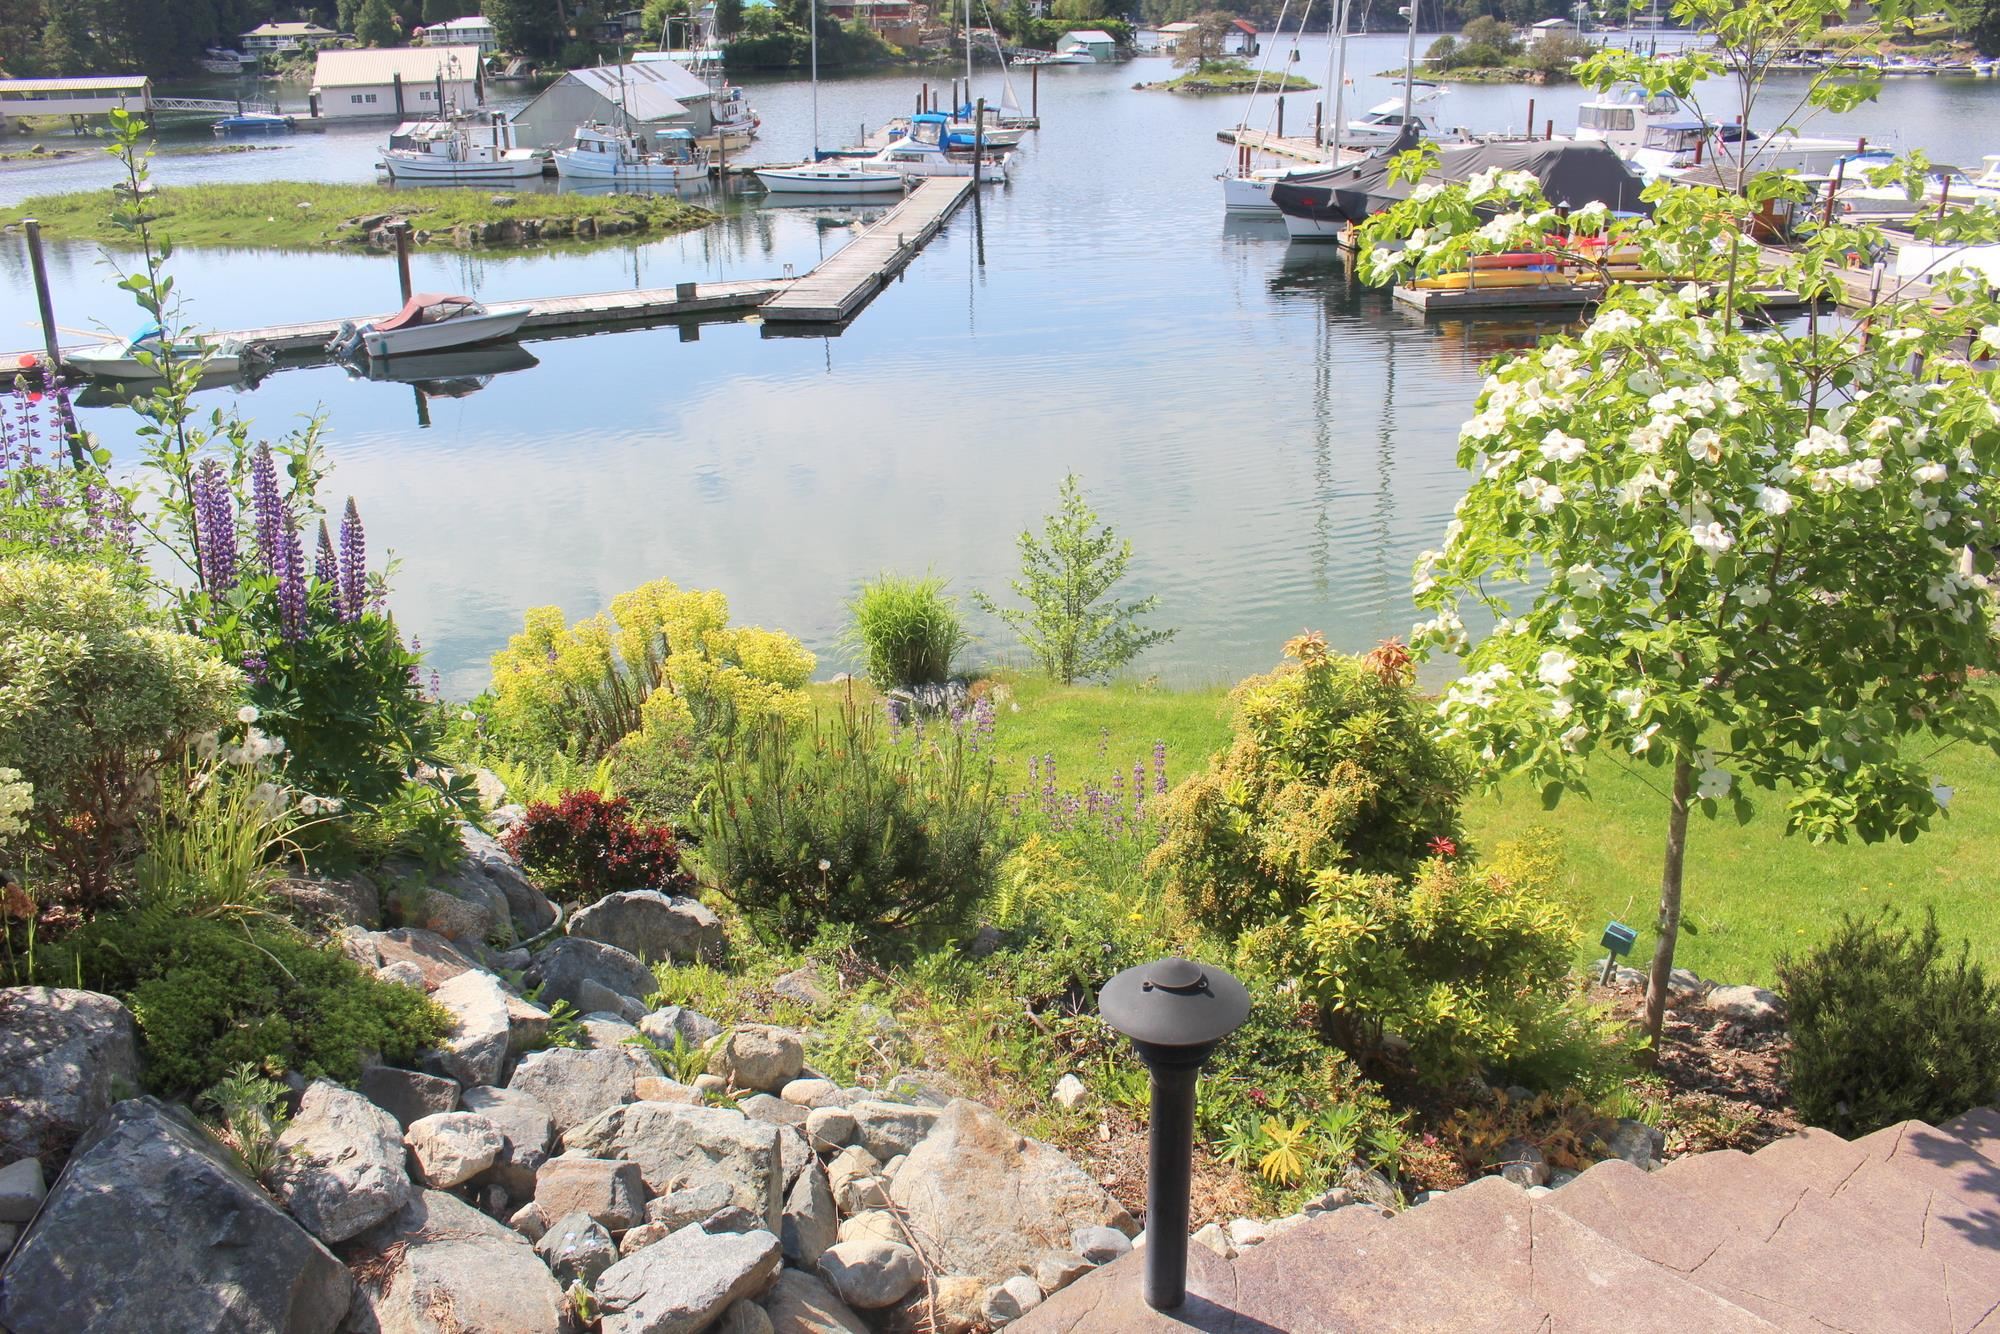 Listing image of 28A 12849 LAGOON ROAD